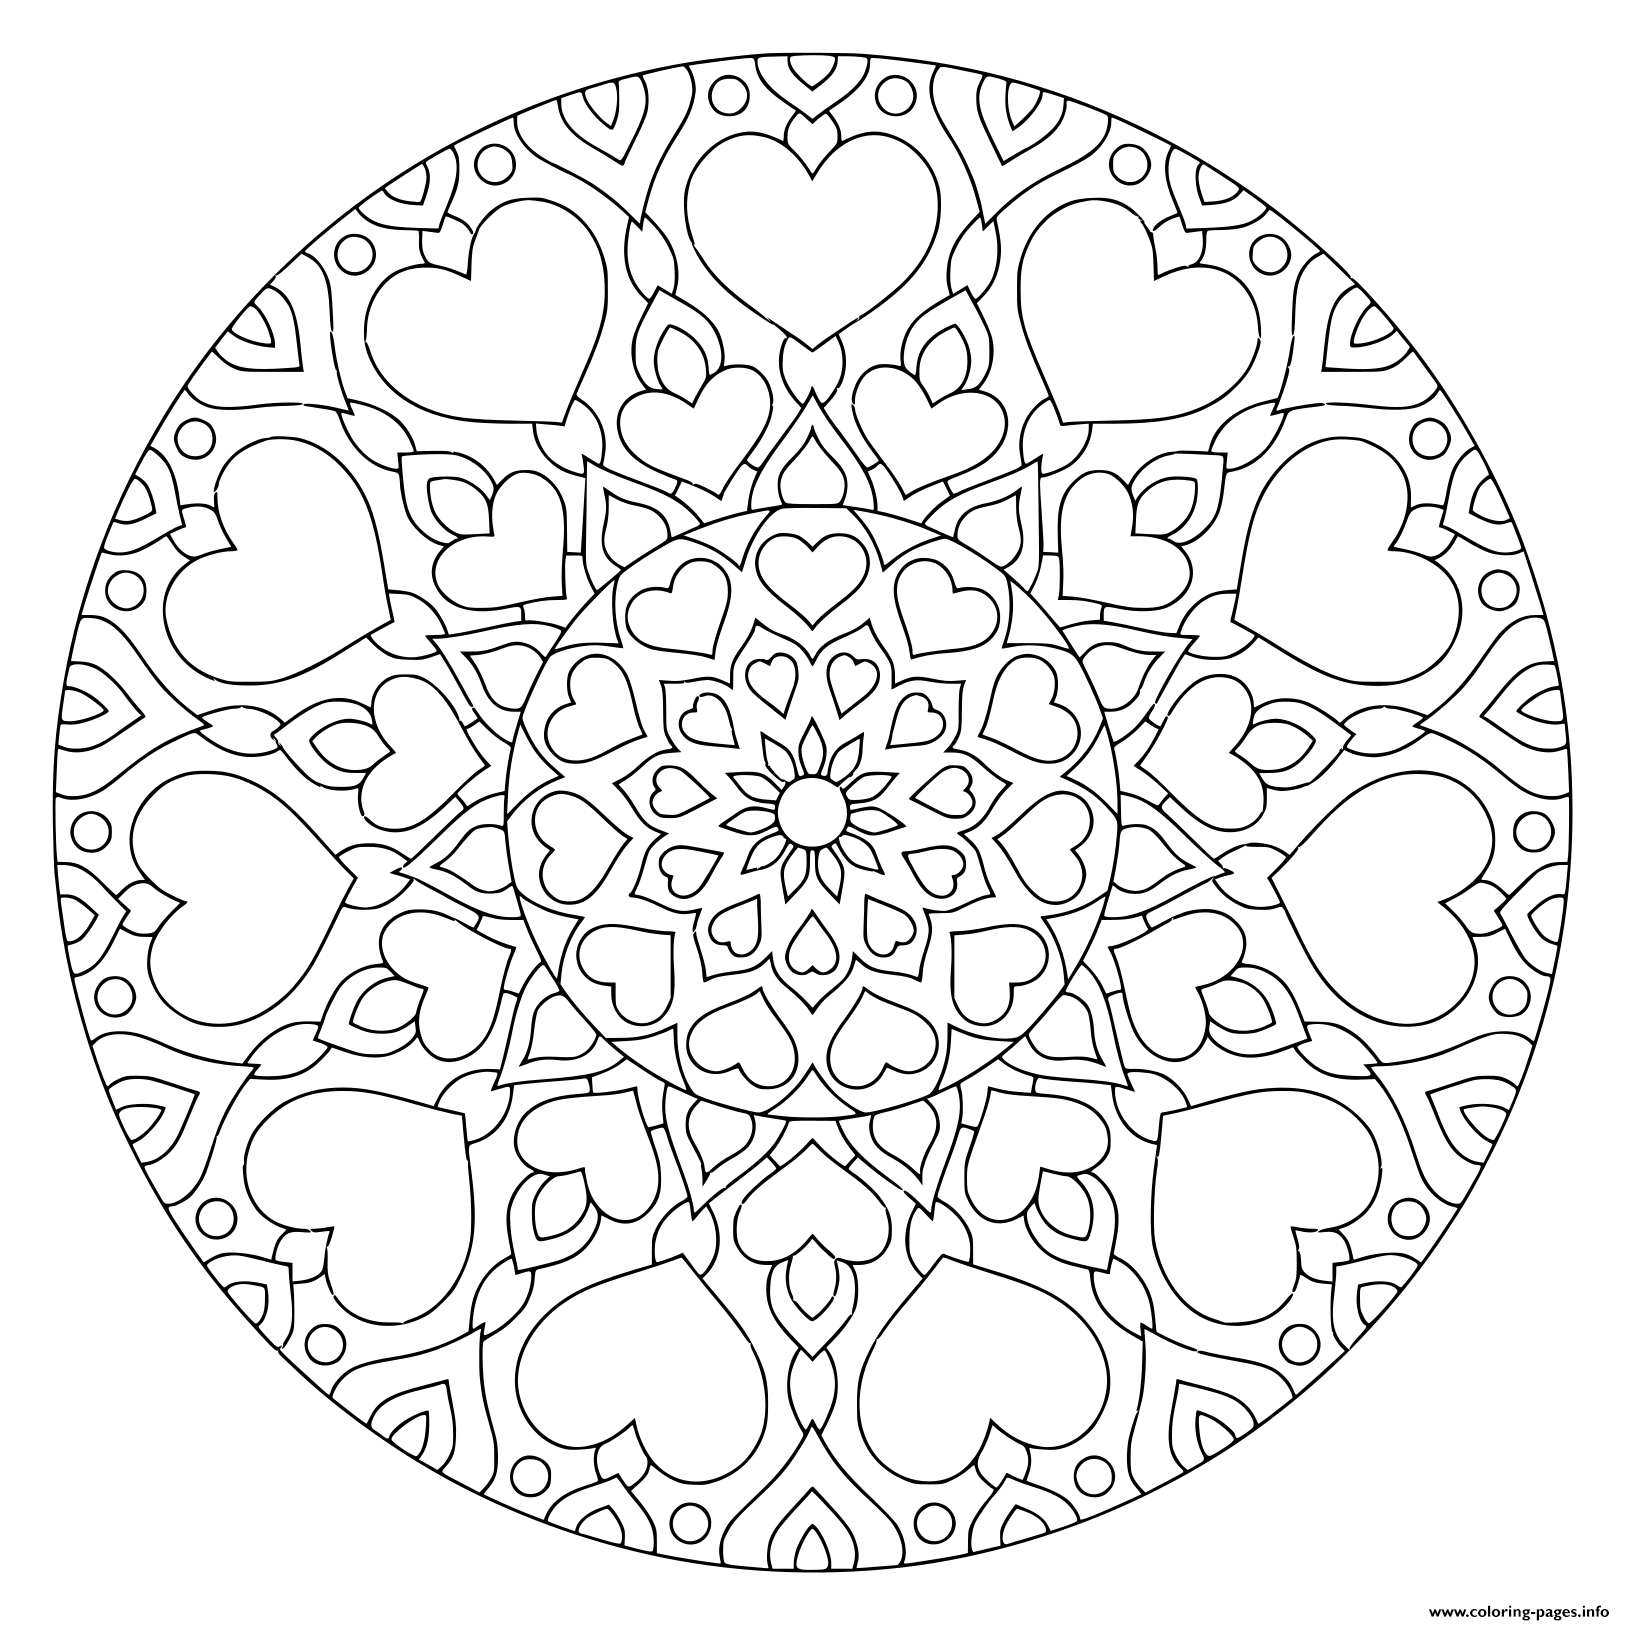 Flower Mandala With Hearts For Valentine S Day  coloring